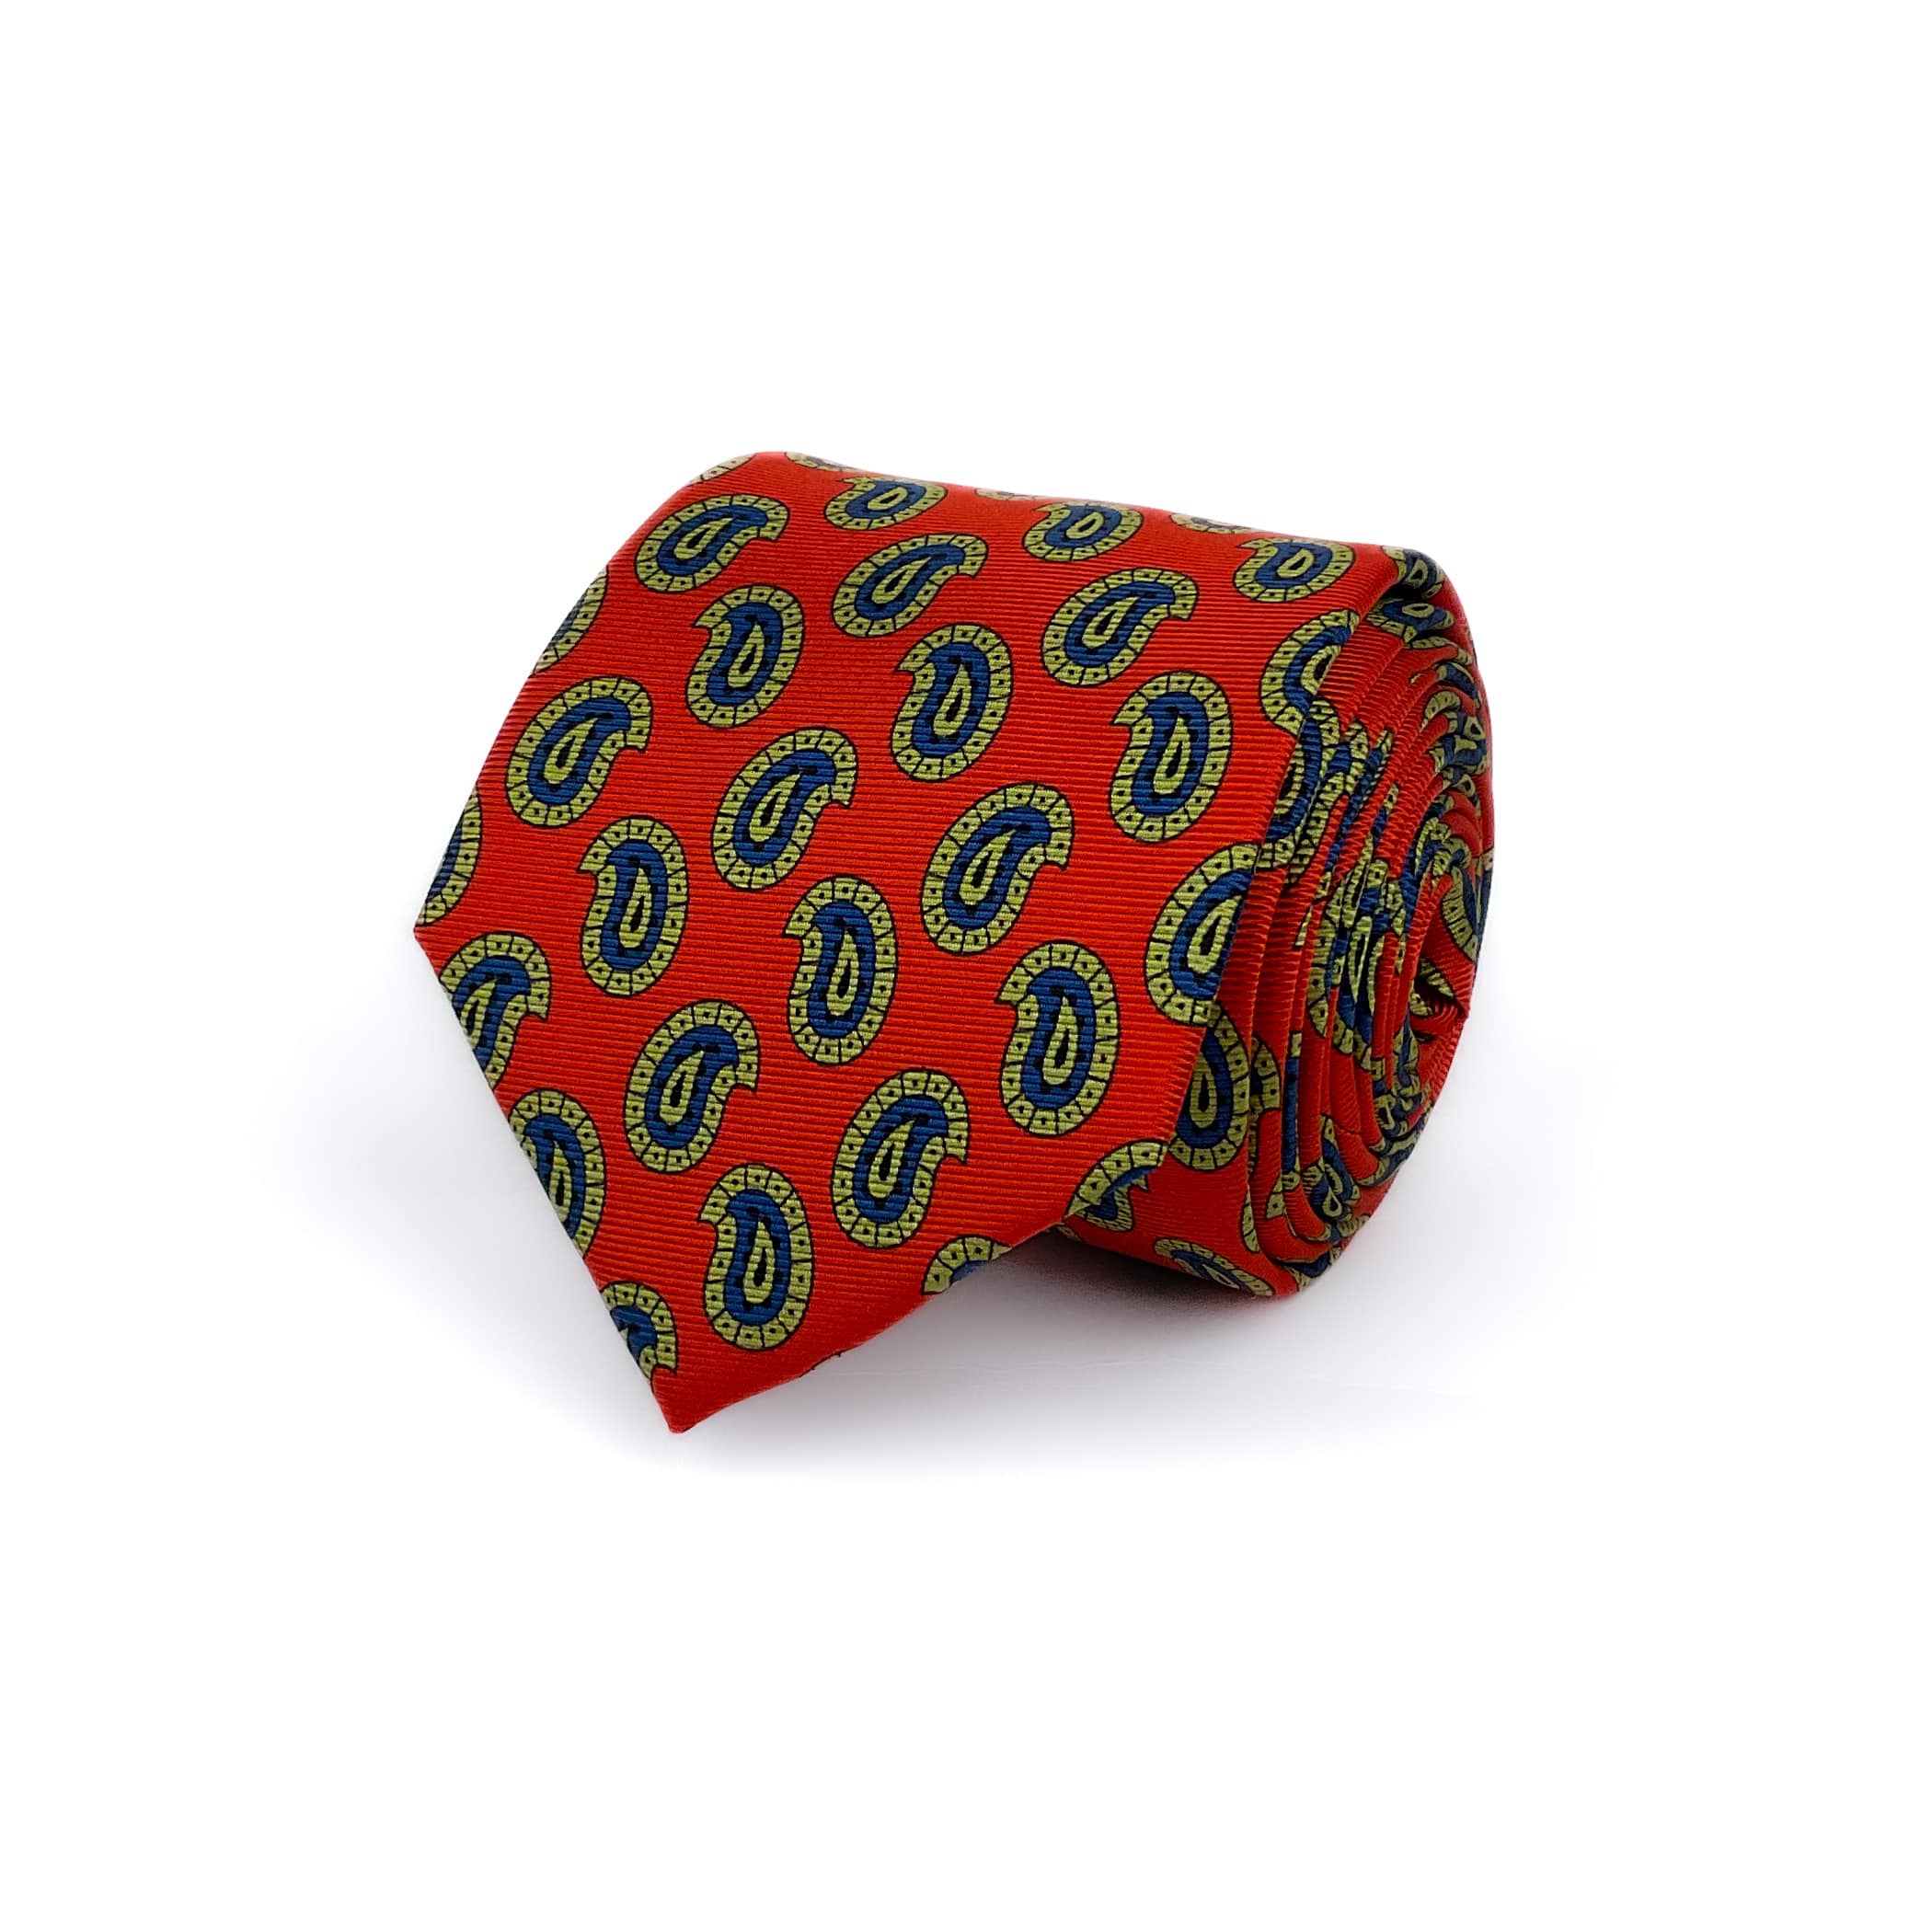 Orange-red silk twill tie with a green and blue paisley pattern rolled and placed against a white background